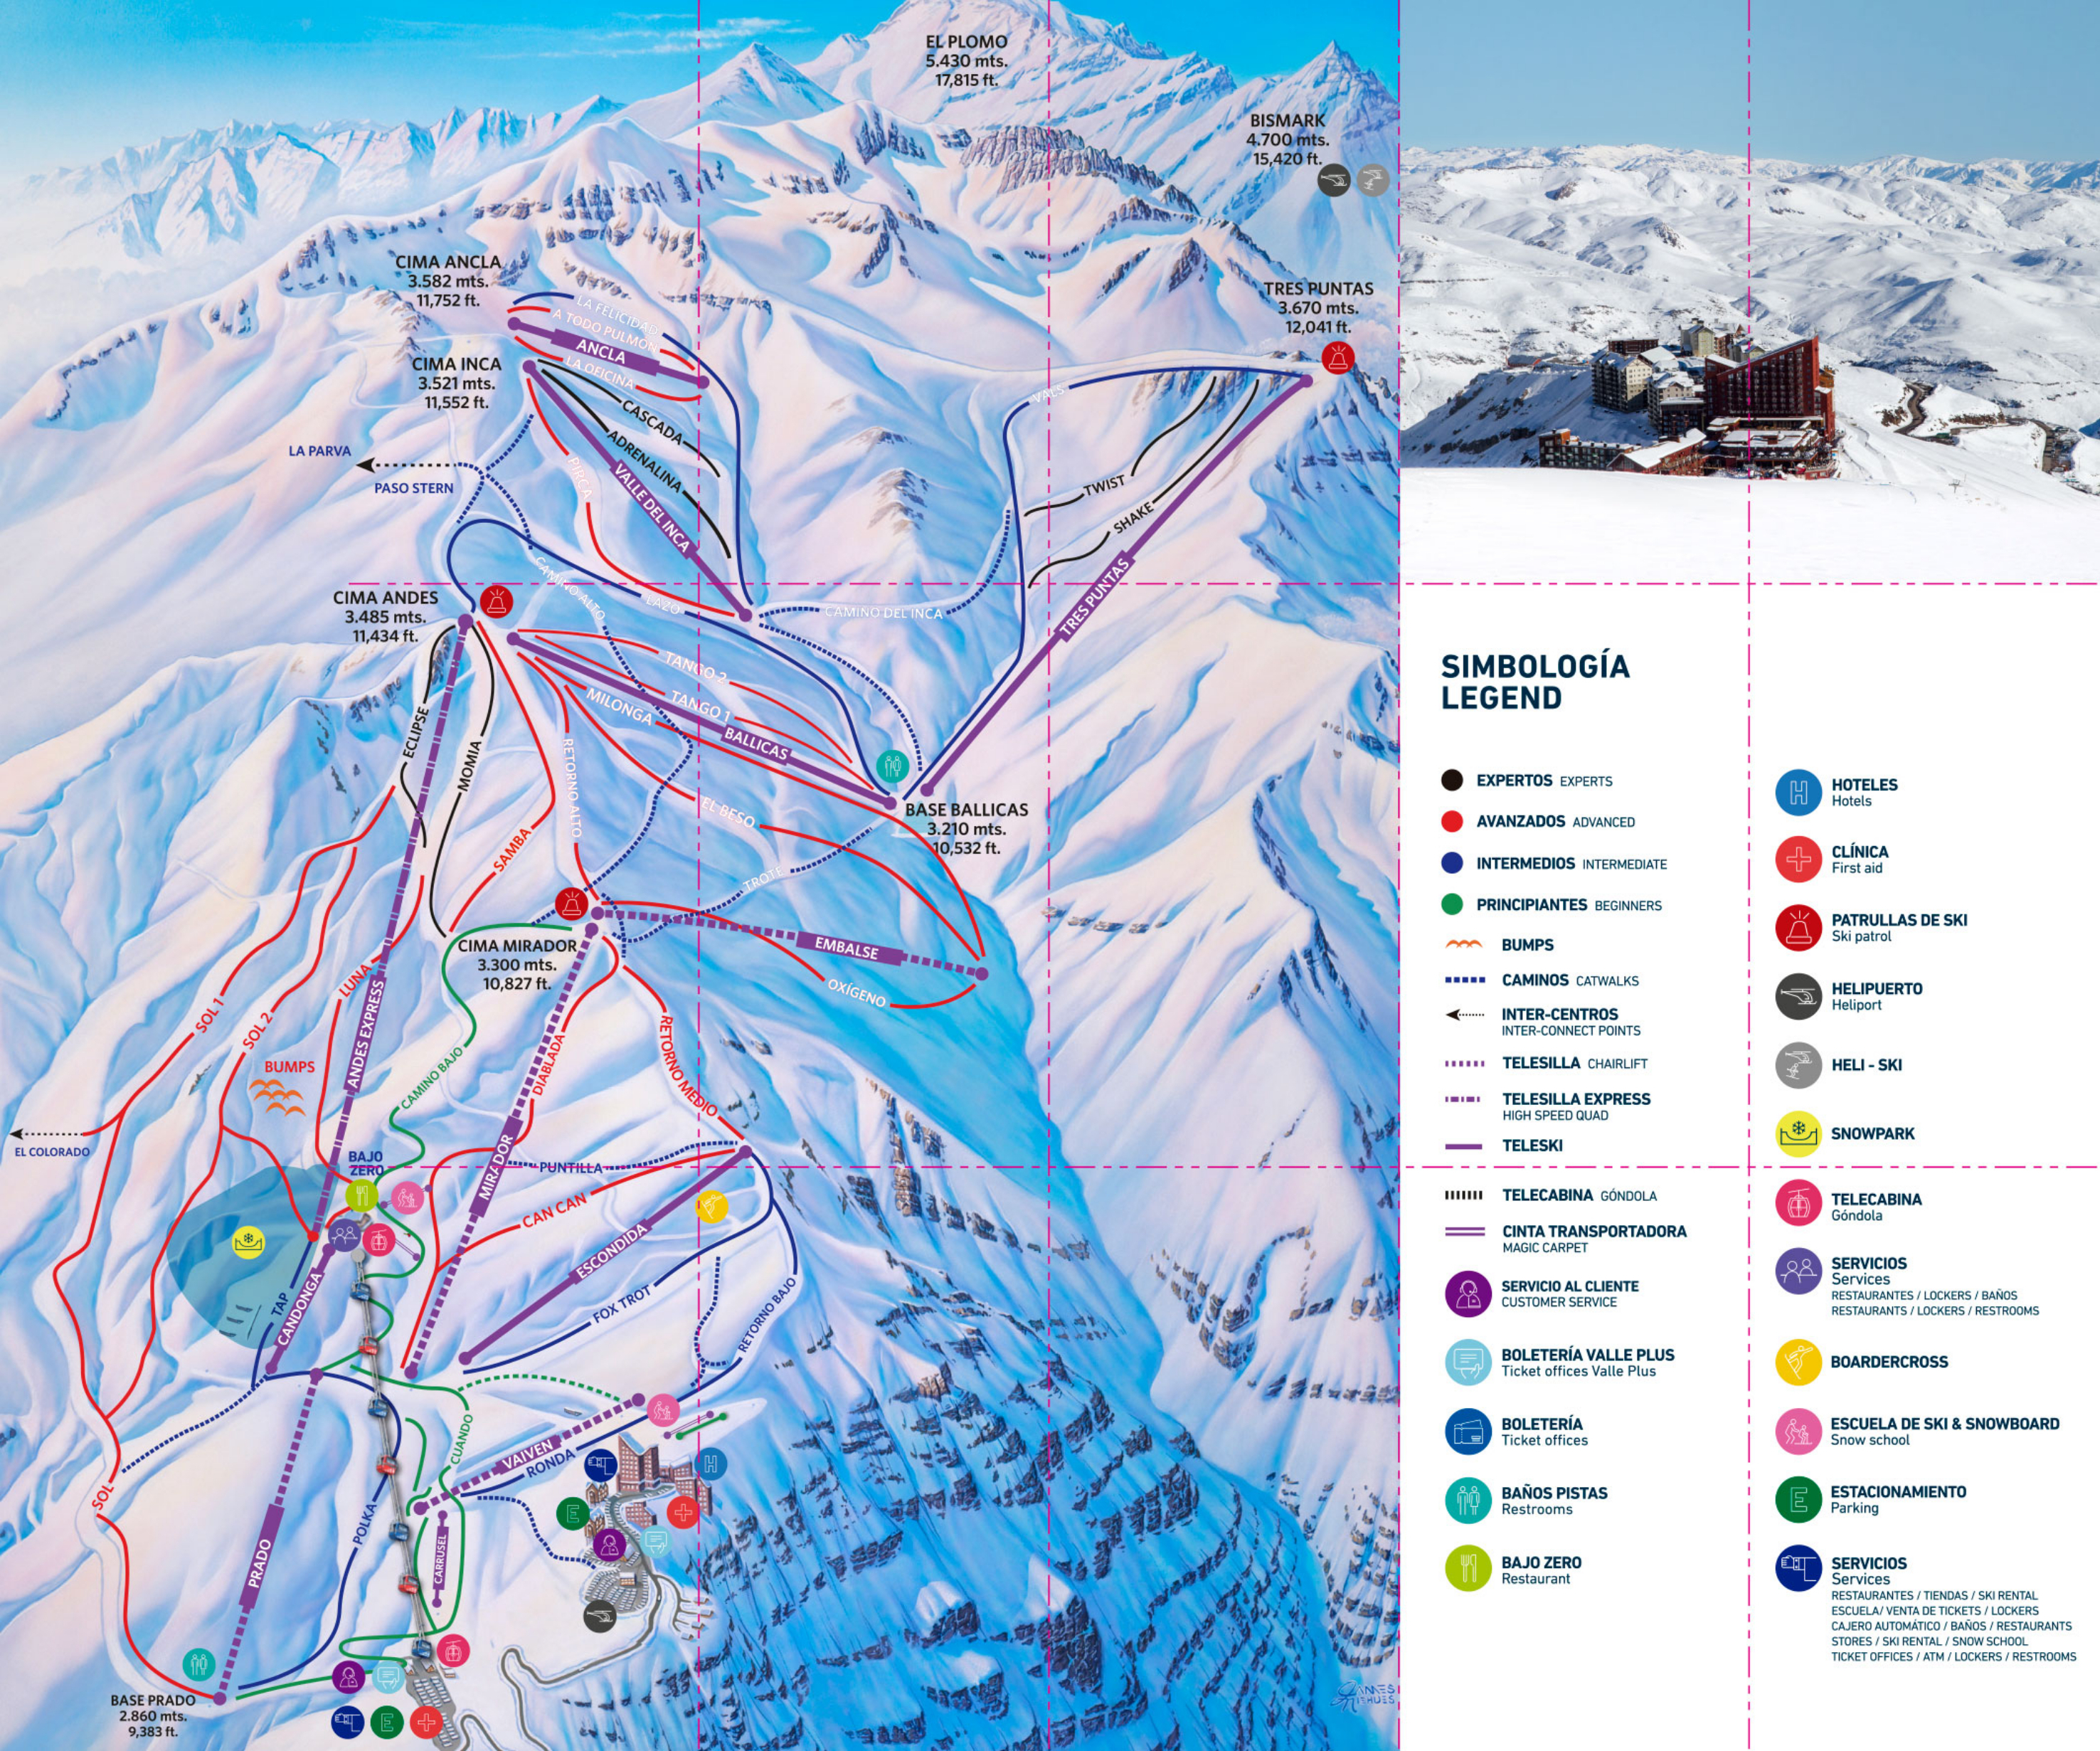 Valle Nevado Ski Resort Guide Location Map Valle Nevado Ski for The Most Awesome and Interesting how to ski valle nevado intended for Your house